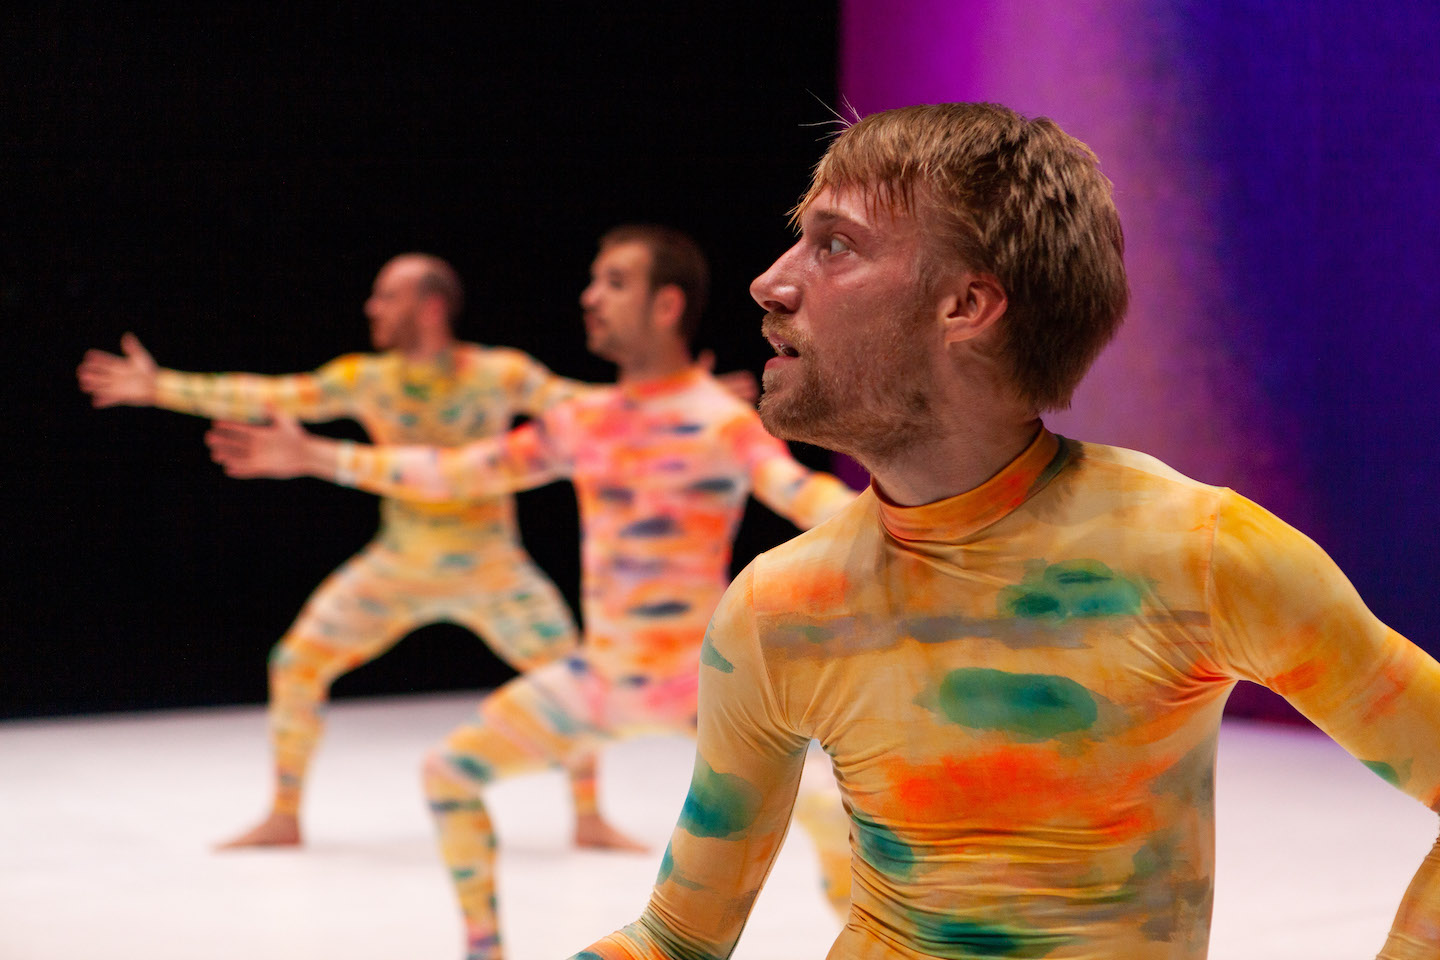 Three men in bright yellow unitards dappled with green, orange and blue, all looking to the left and bent into a wide demi-plié, against a dark purple background. The man in front is in sharp focus with a somewhat alarmed expression, the two behind are blurred.